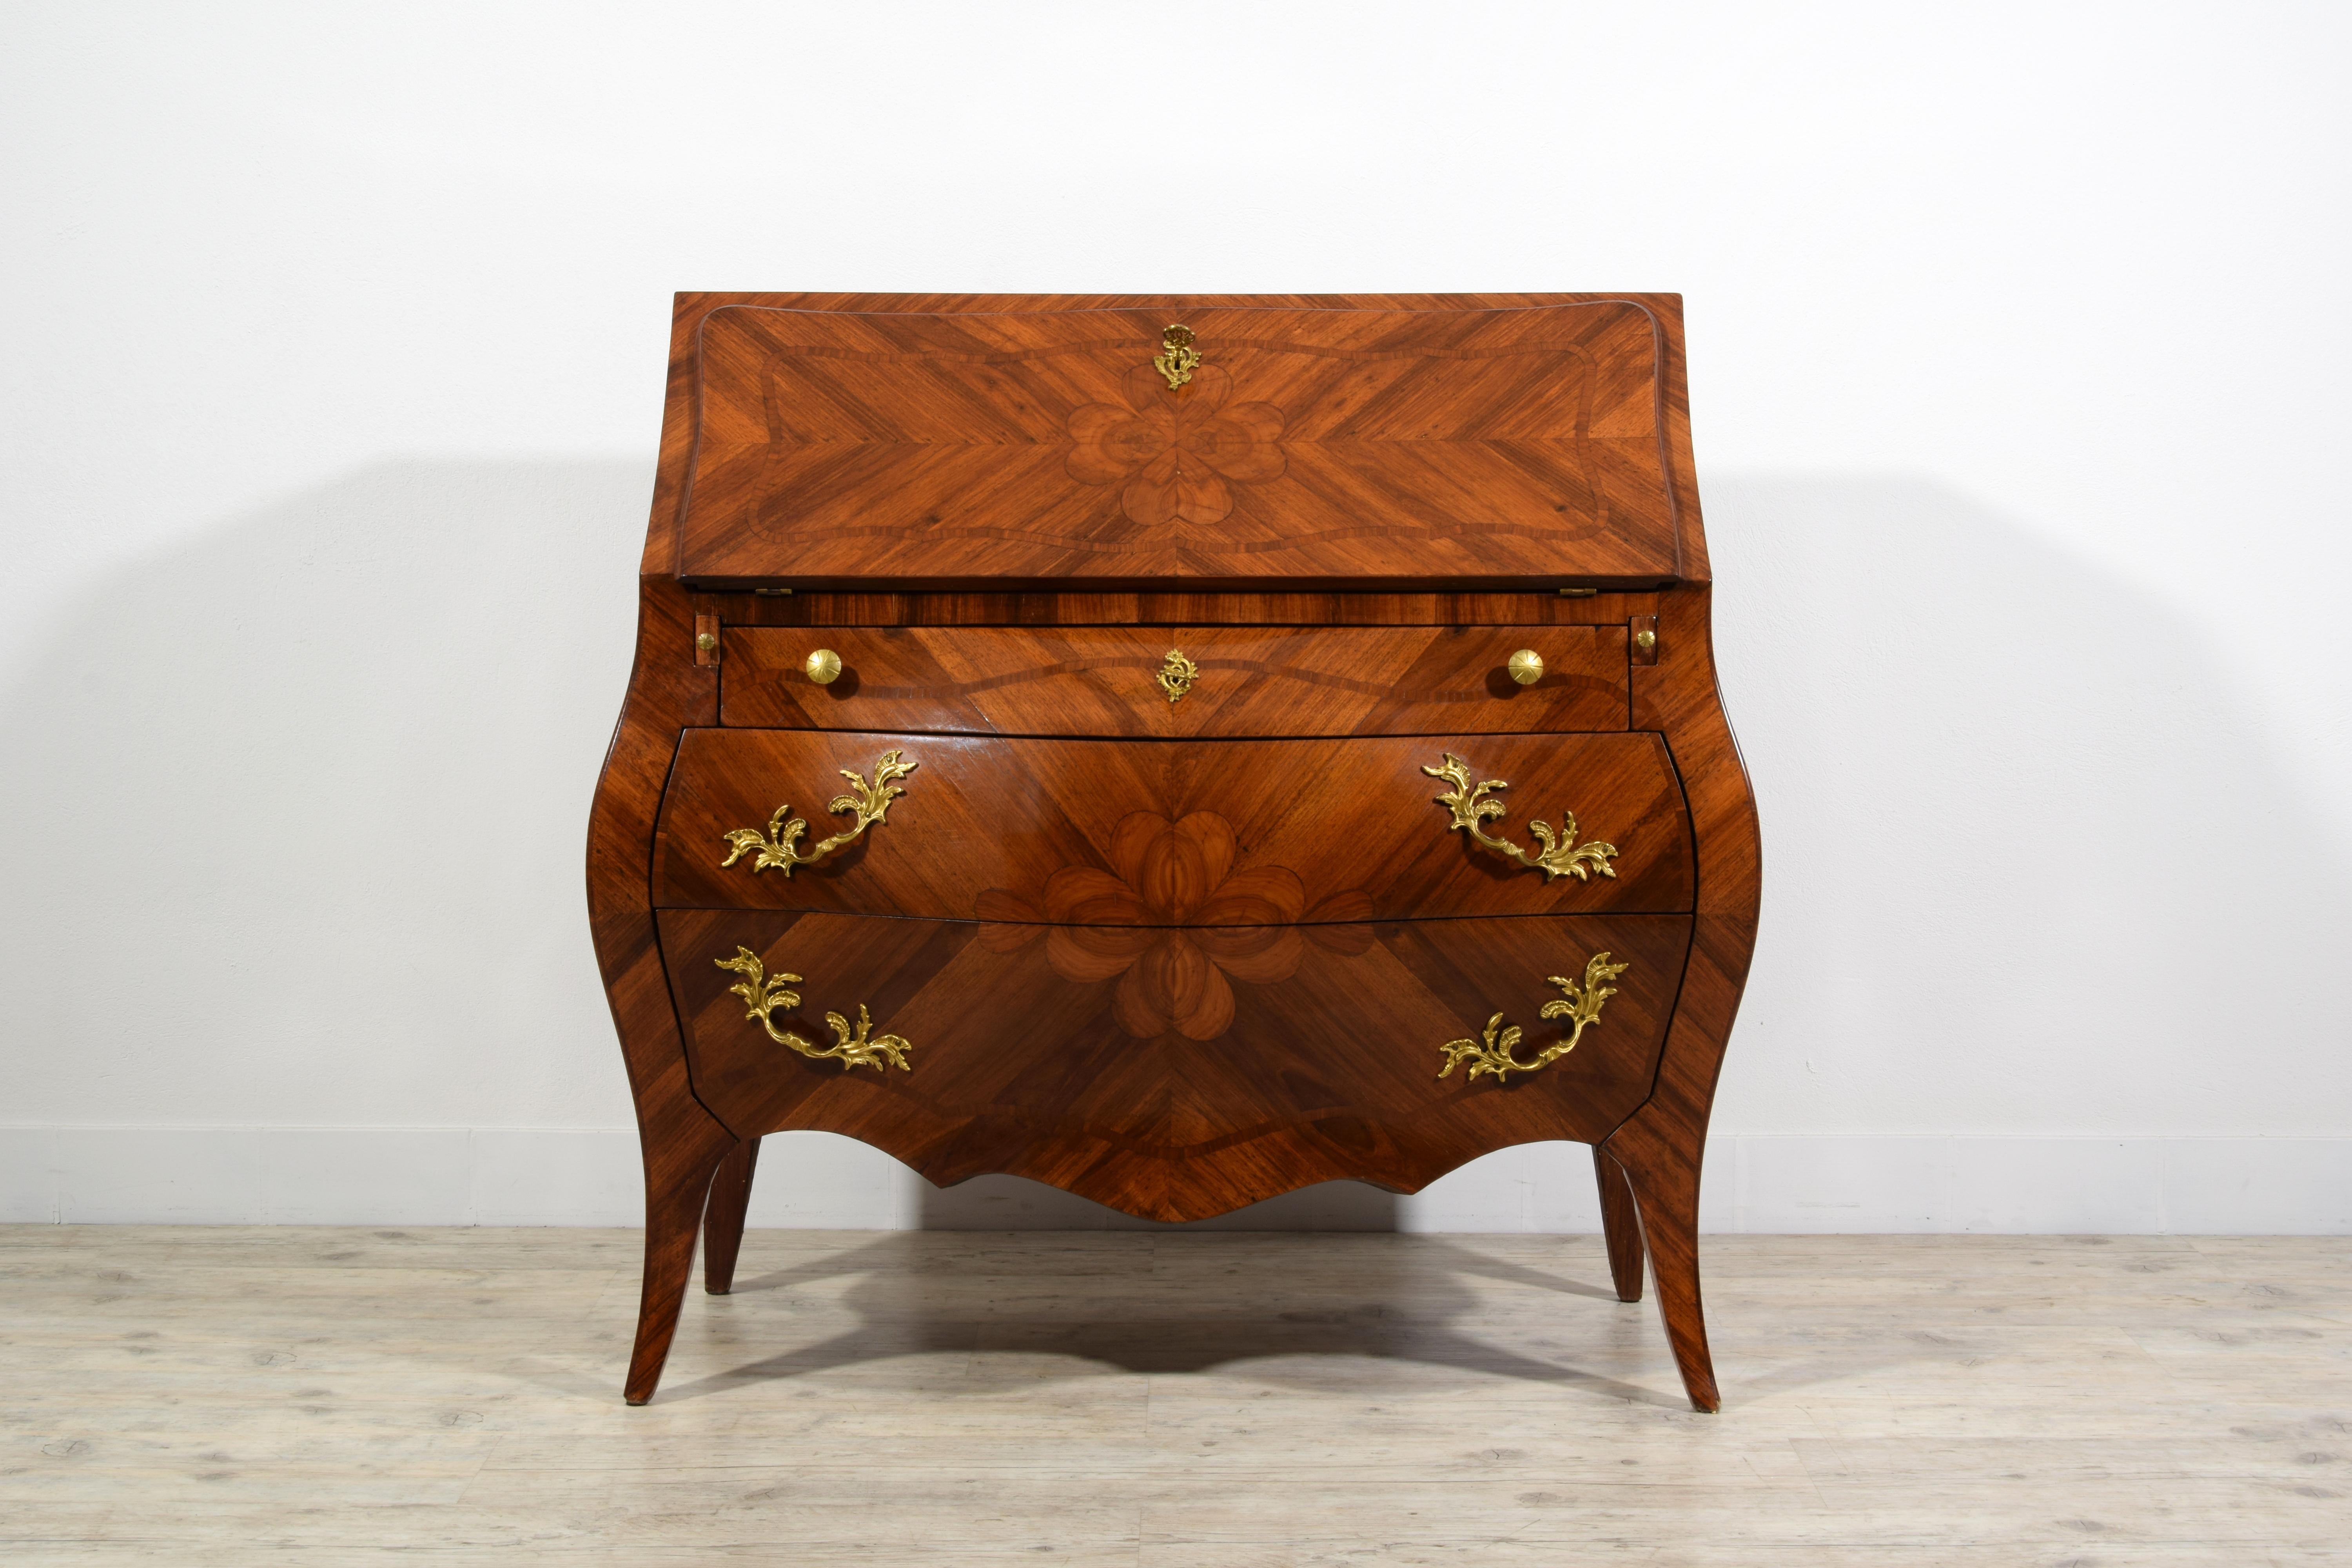 19th Century, Italian Louis XV style Veneered Wood chest of drawers
This chest of drawers was made in Genoa in the second half of the nineteenth century, in the characteristic style of the Genoese Baroque era.
The chest of drawers is made of